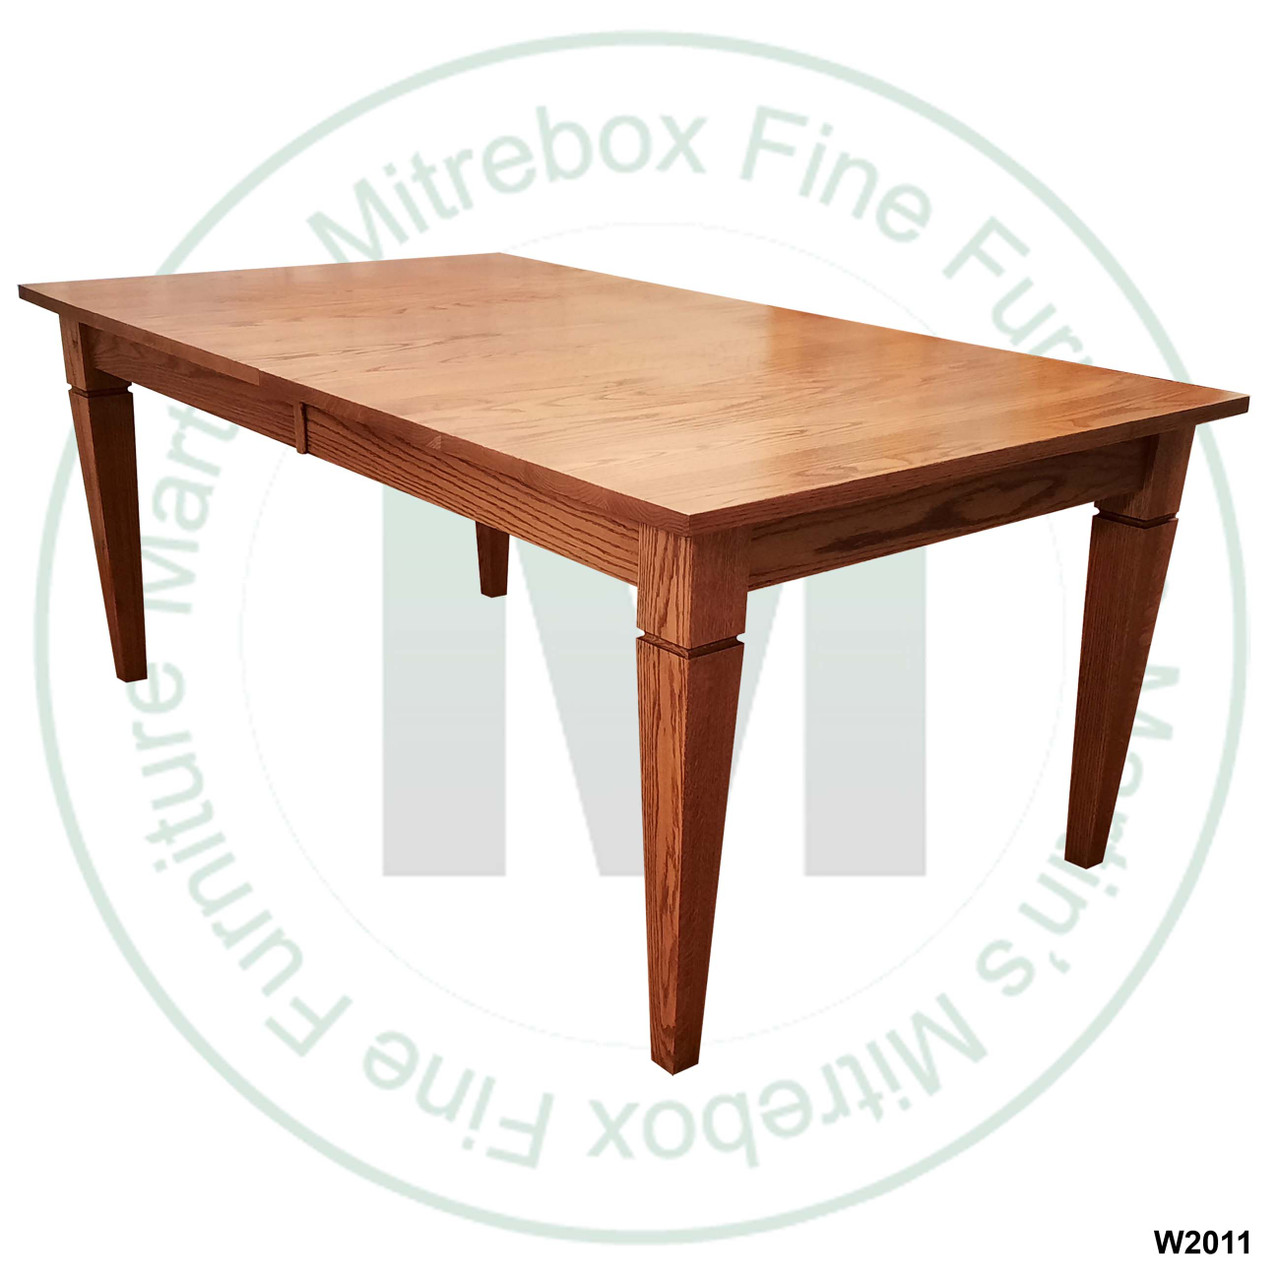 Oak Reesor Solid Top Harvest Table 42''D x 60''W x 30''H Table Has 1 3/4'' Thick Top